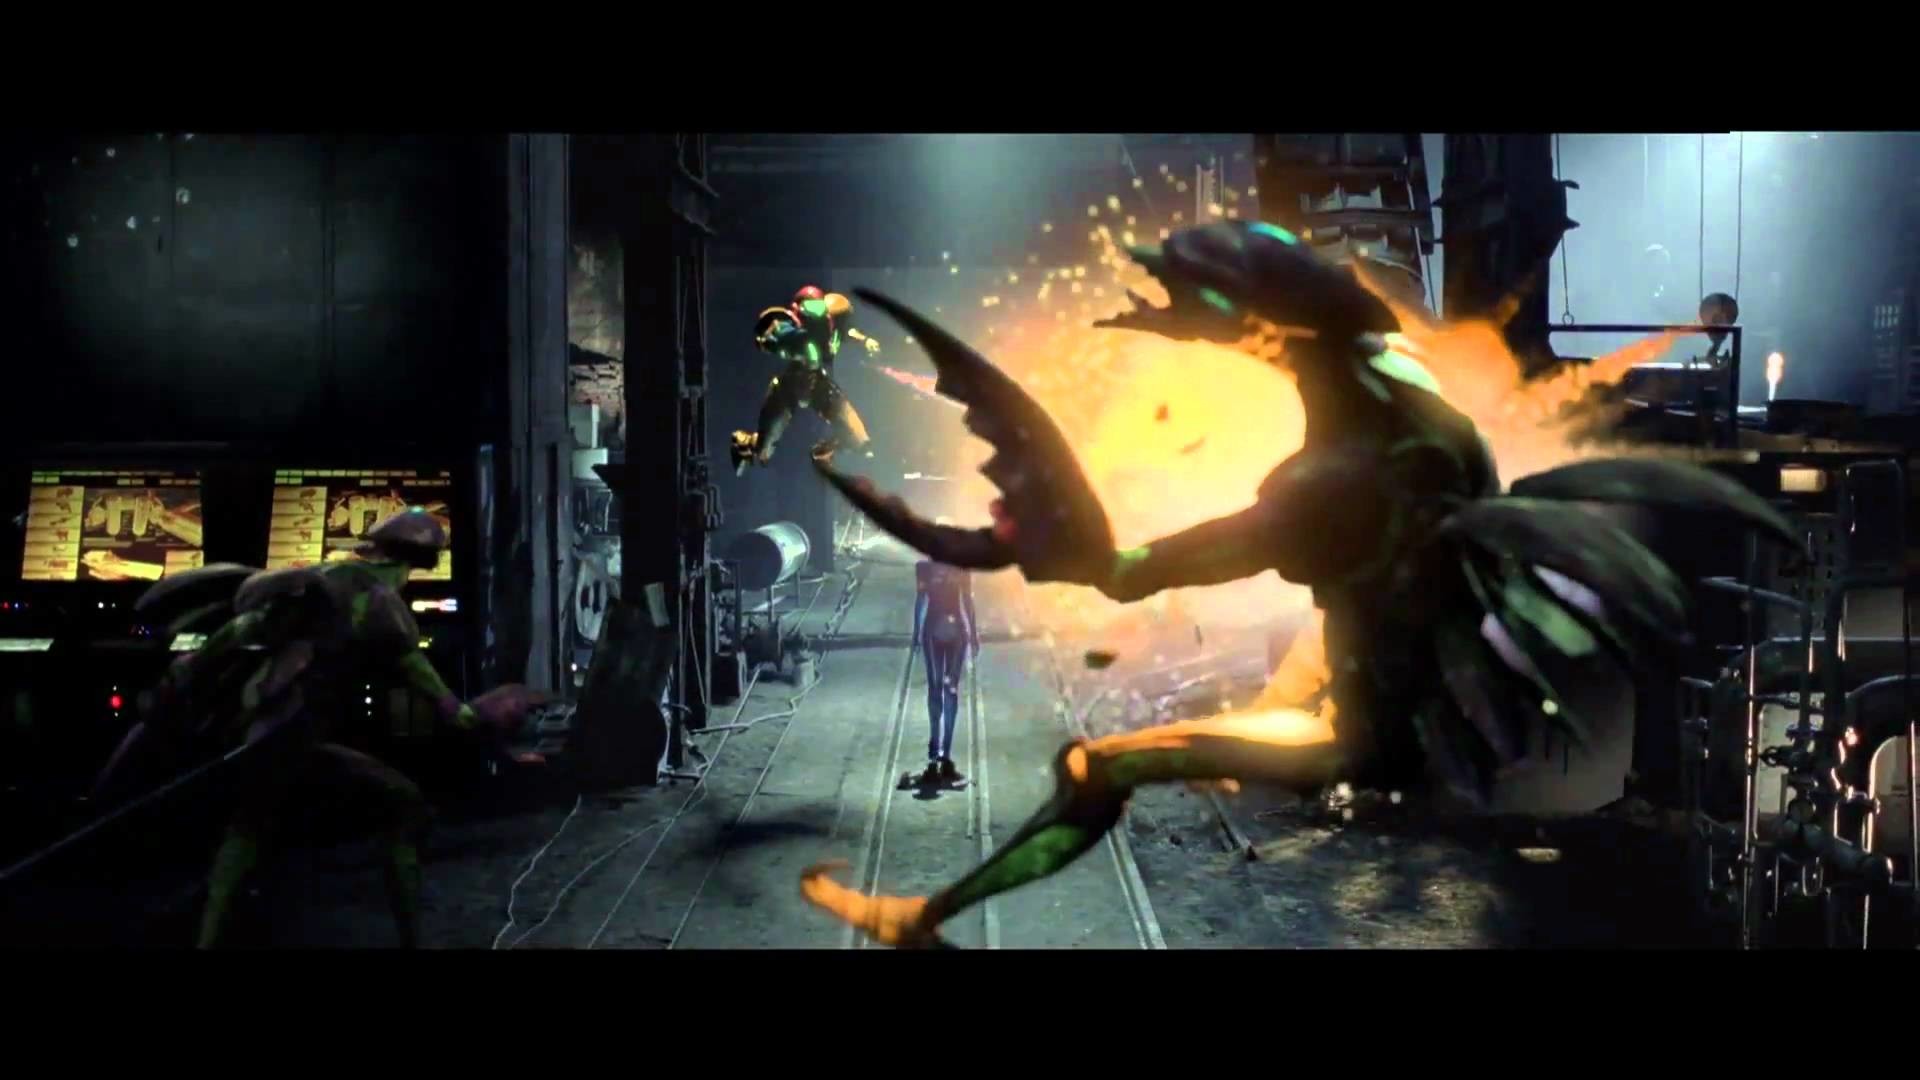 metroid live wallpaper,pc game,action adventure game,movie,digital compositing,action film